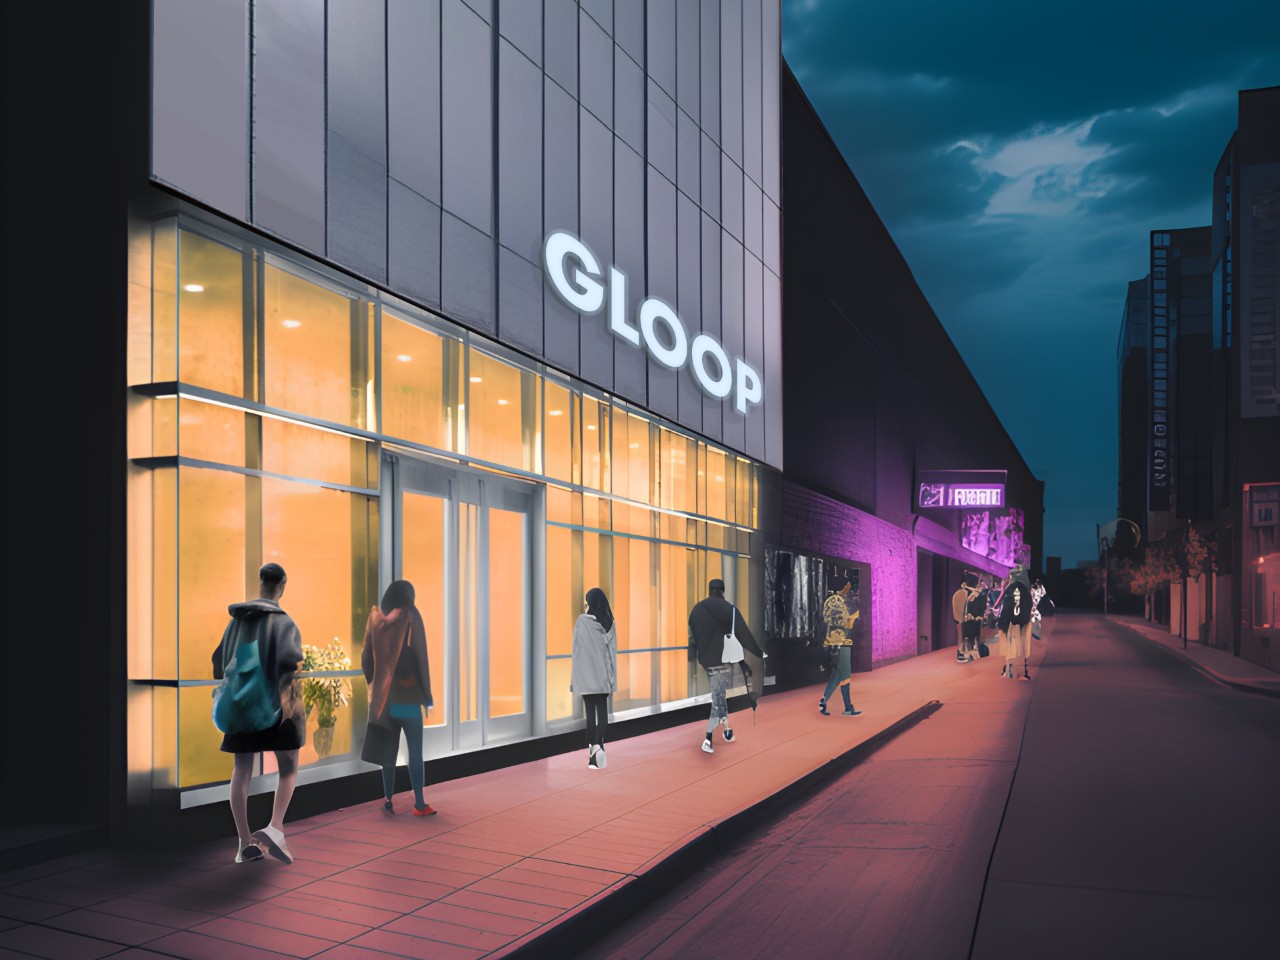 People walk along a contemporary streetscape with bland corporate building that has 'Gloop' written on the side